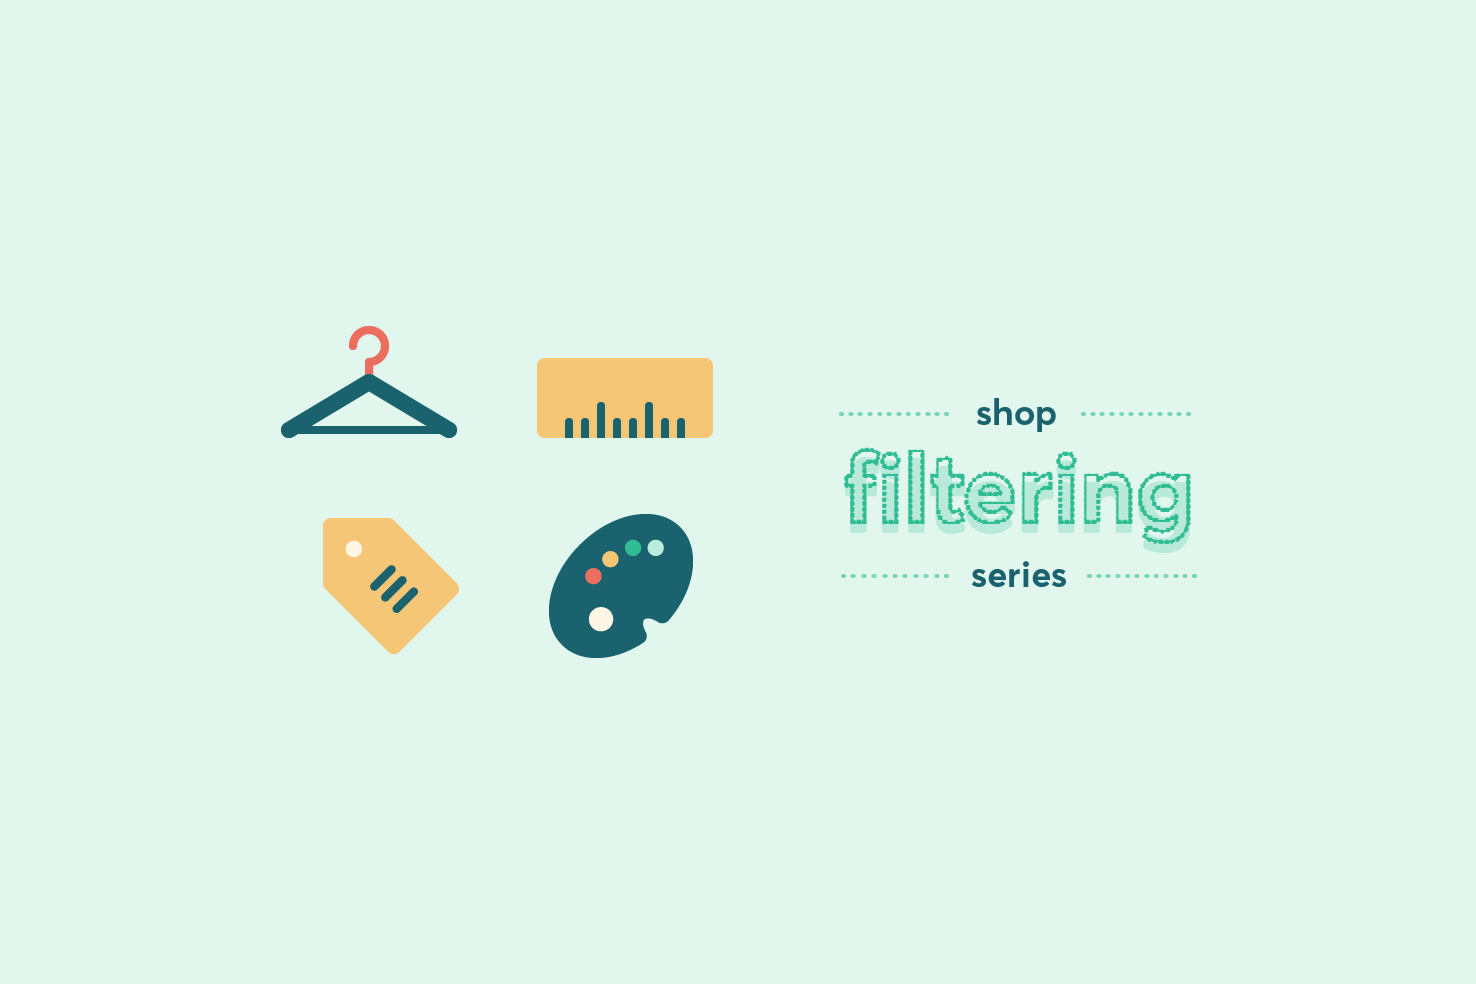 Shop filter series: completing the filters